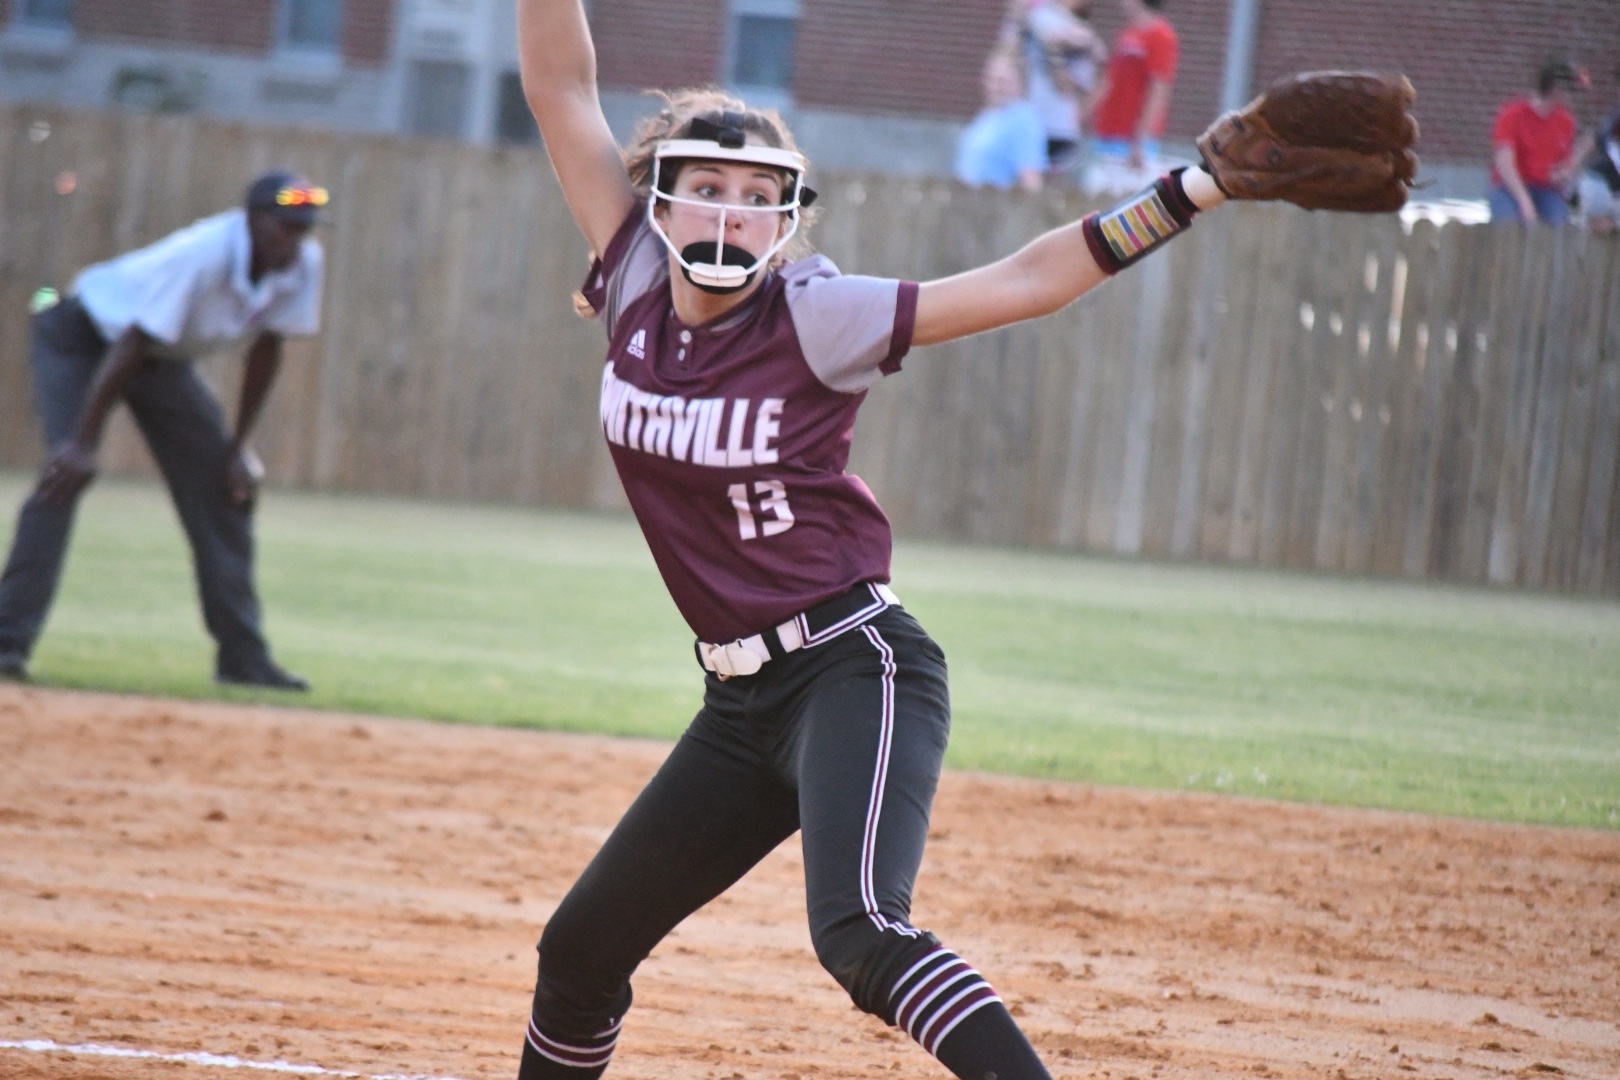 Smithville headed to State Championship after North Half sweep